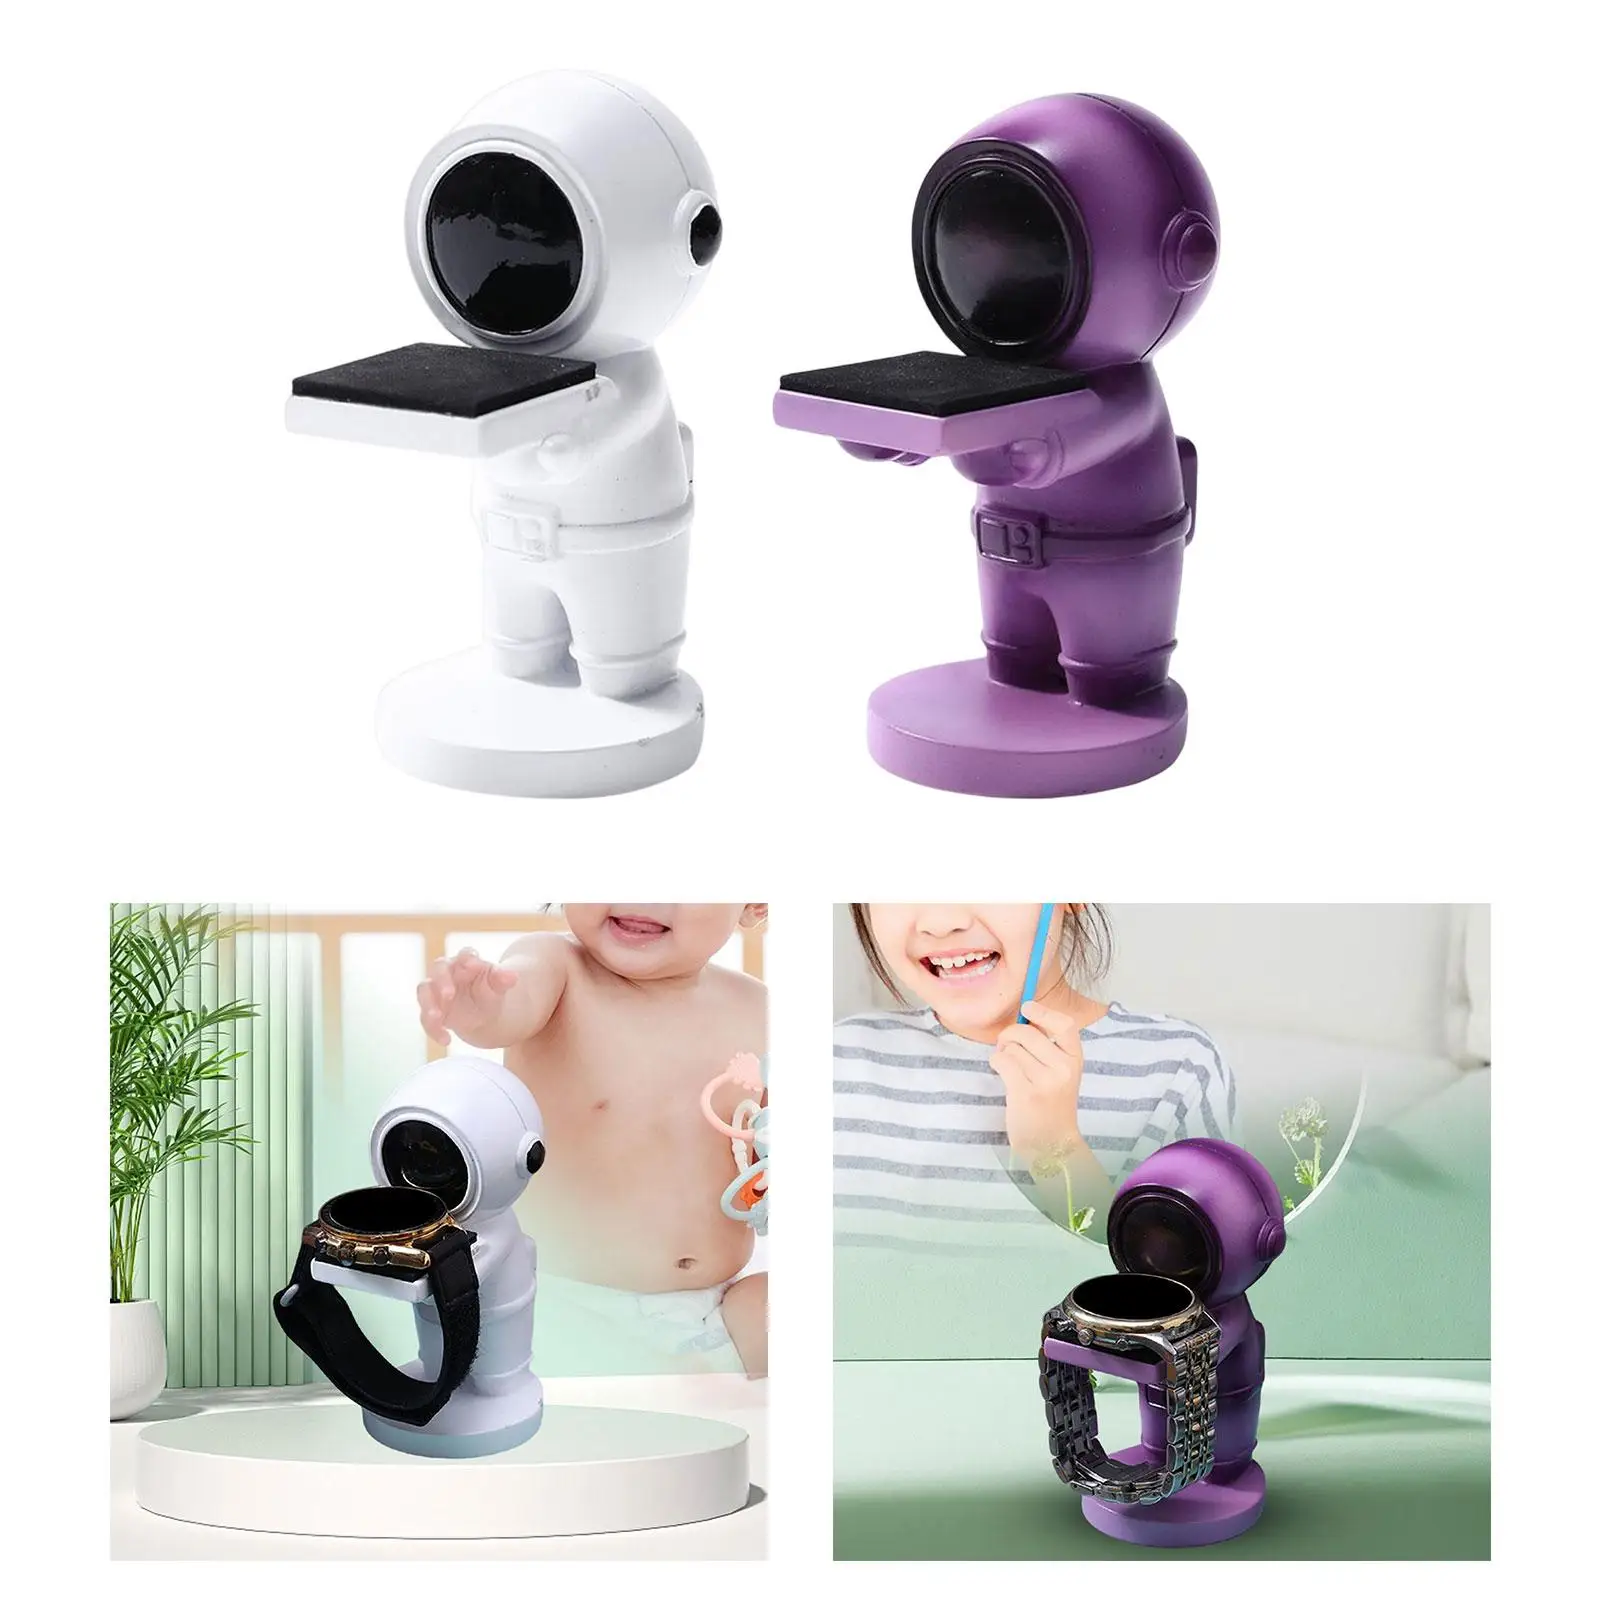 Astronaut Watch Stand Cute Figurine Ornament Resin Jewelry Organizer Small Statue for Bracelets Rings Necklaces Living Room Desk